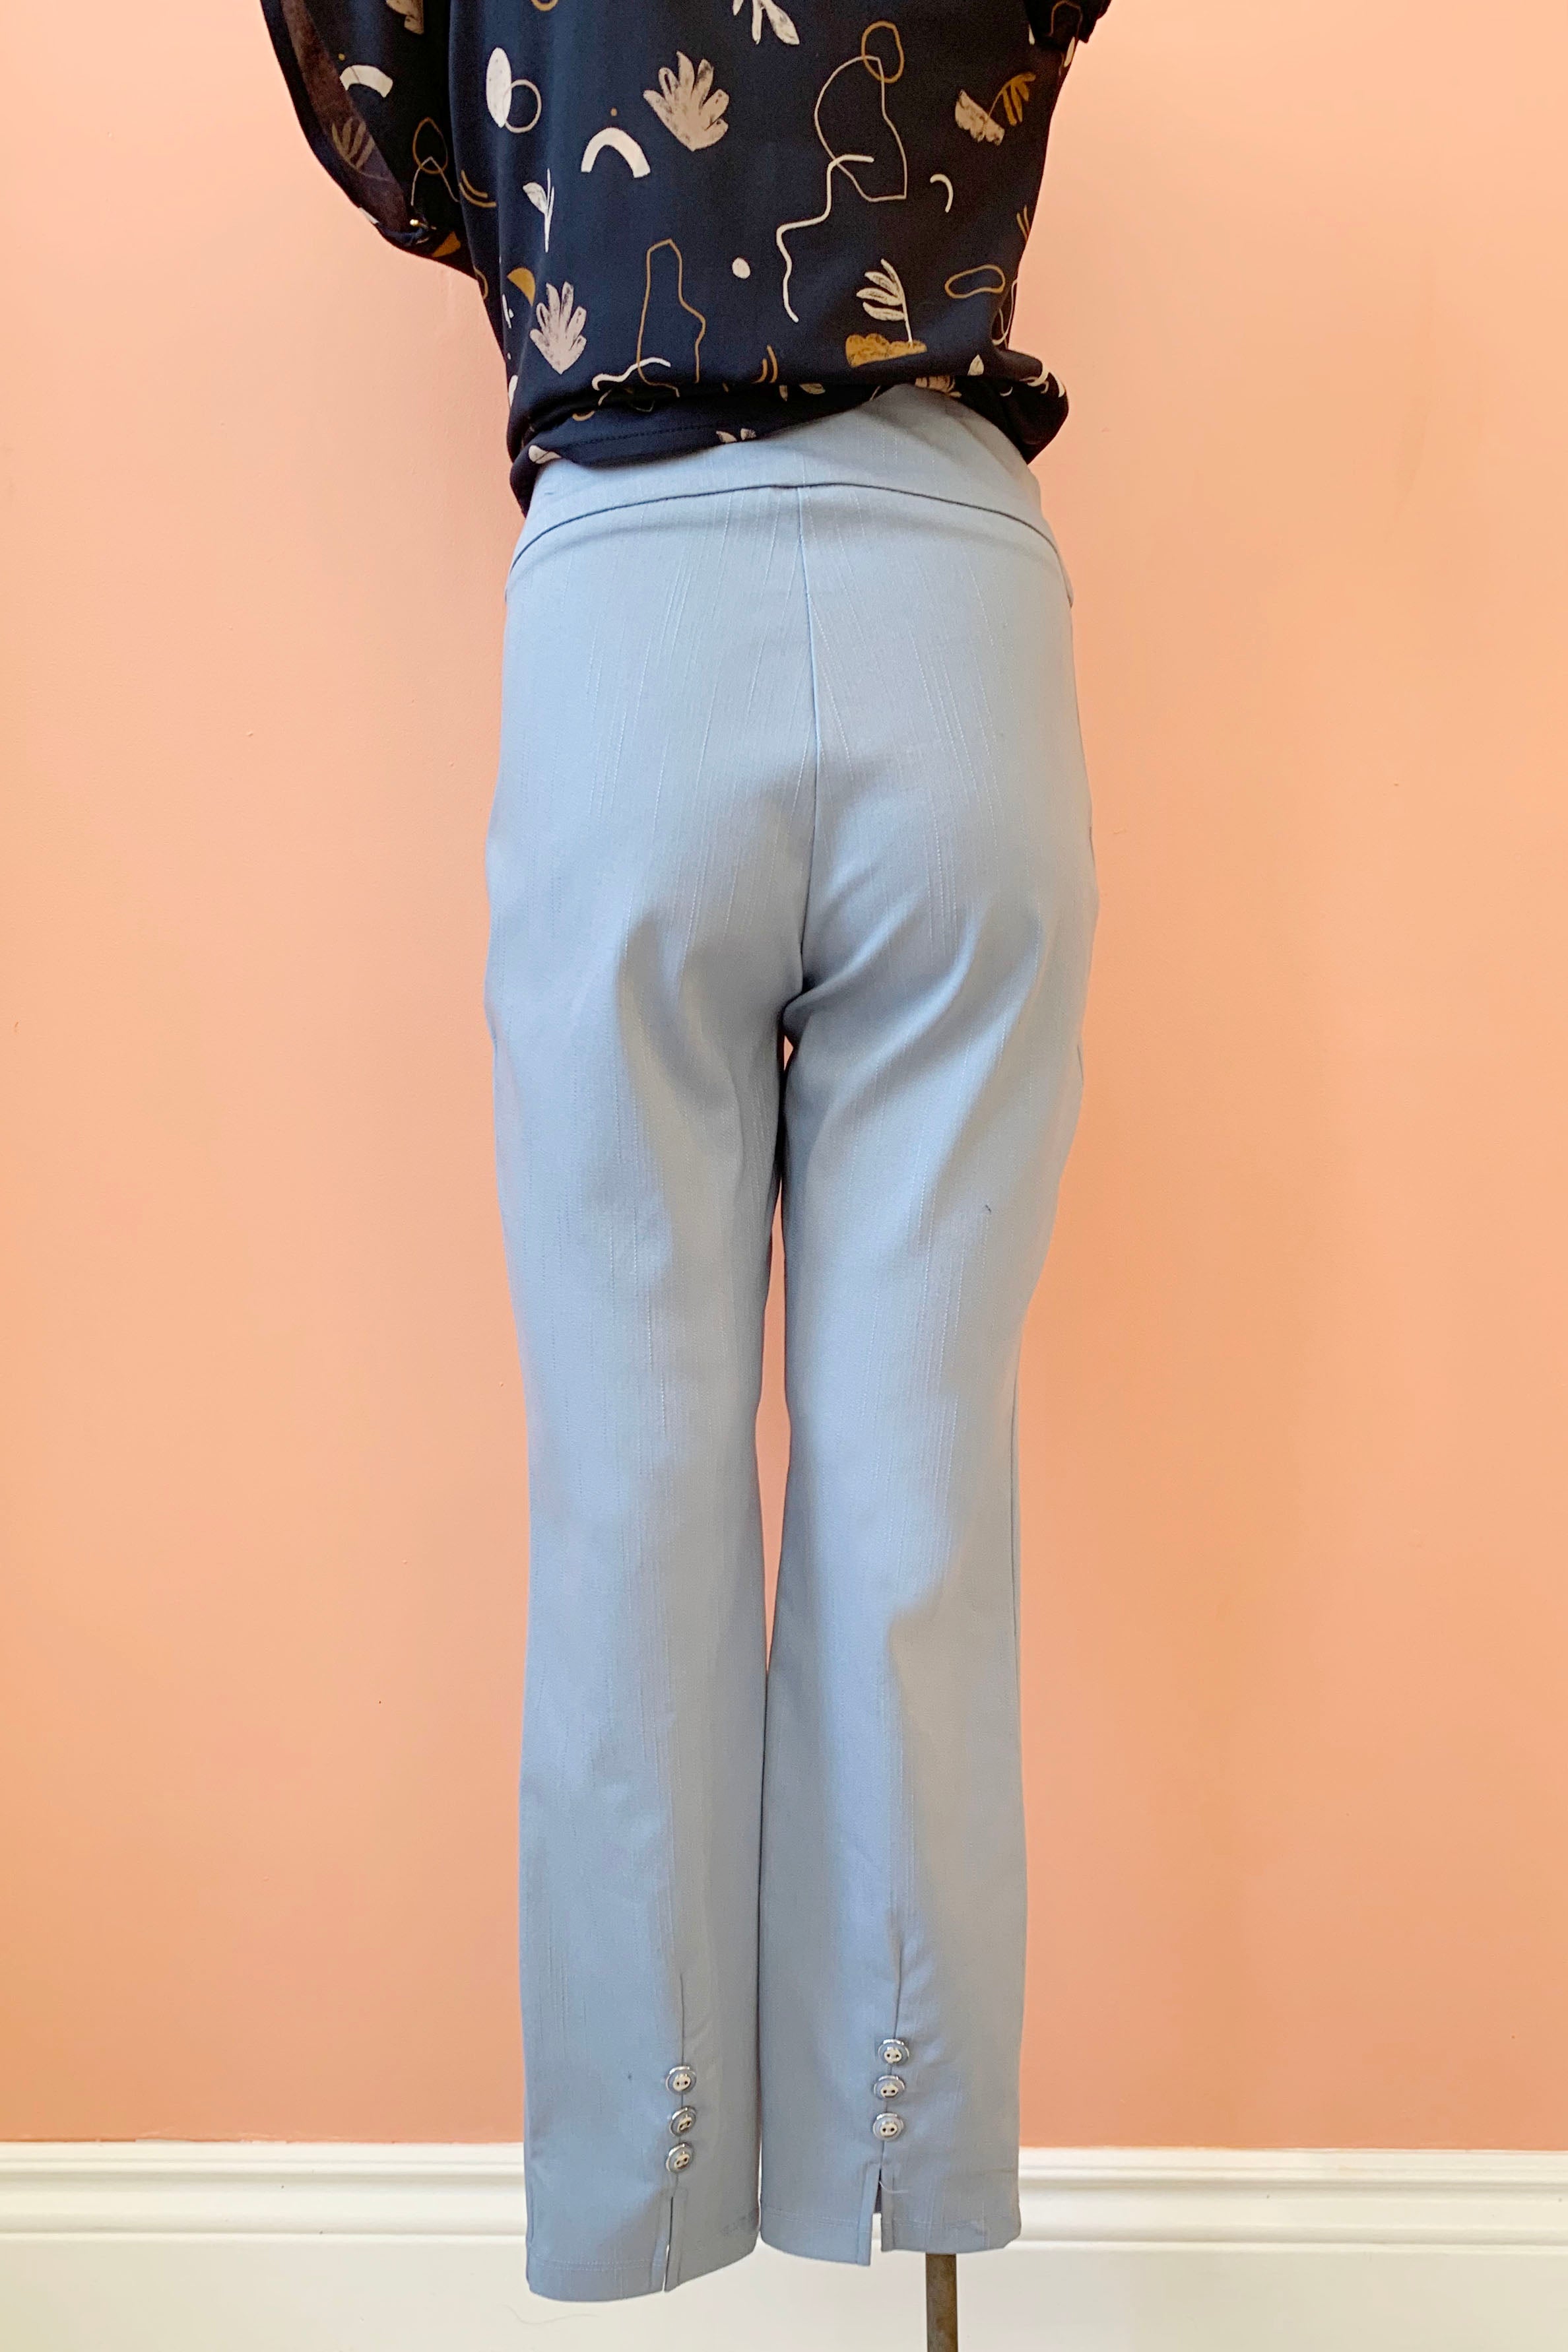 Otto Pants by Pure Essence, Blue, back view, pull-on, wide waistband, triple button and slit detail at back leg hems, sizes XS to XXL, made in Canada